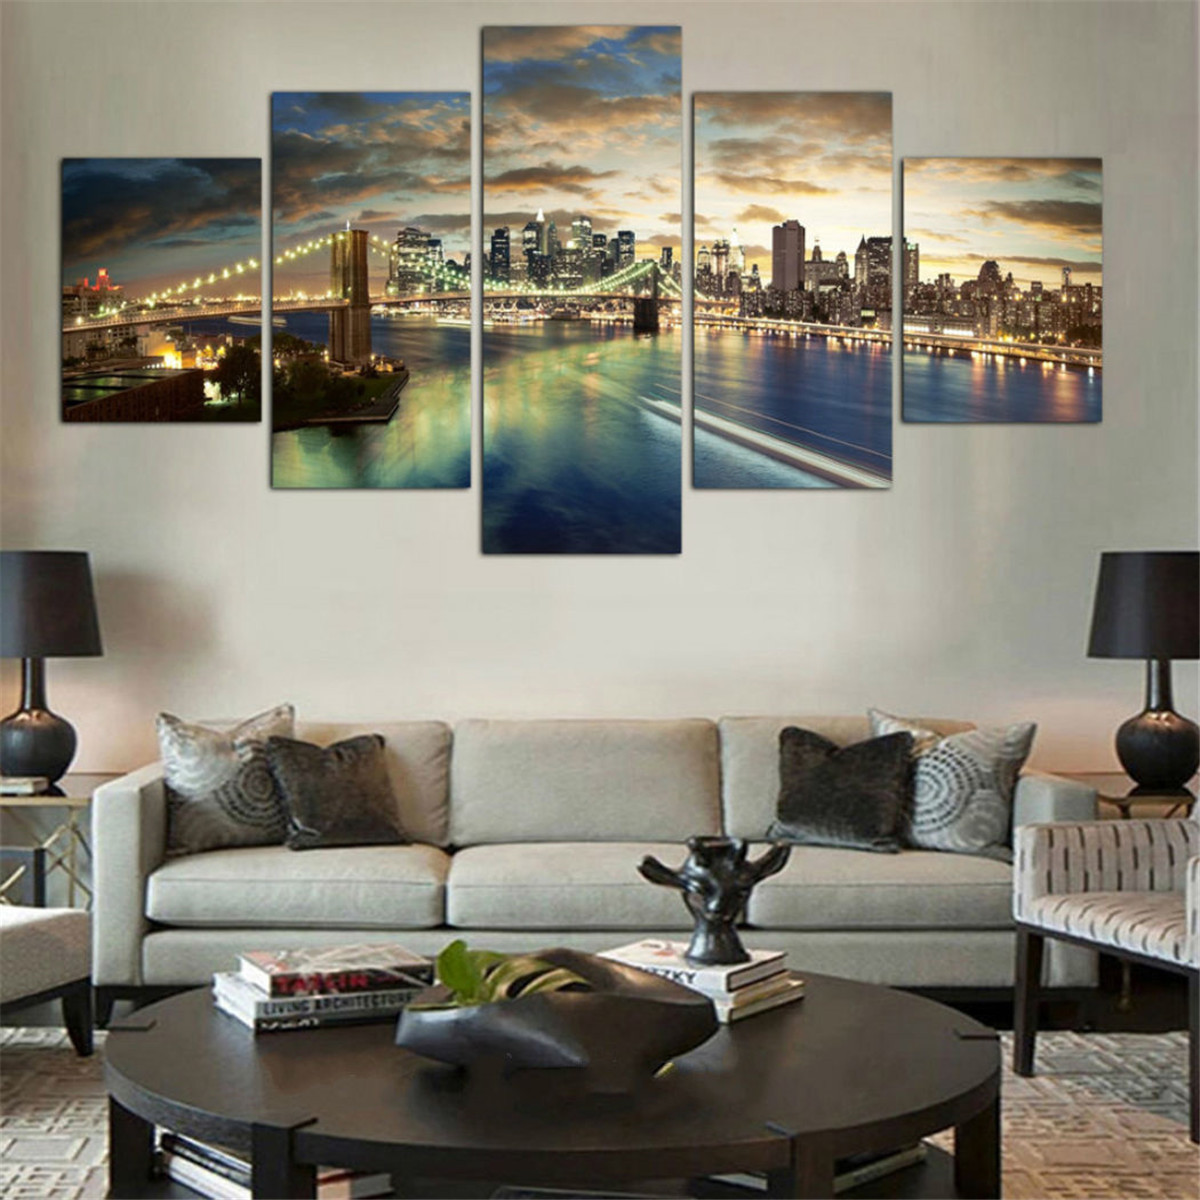 5-Pcs-Wall-Decorative-Painting-New-York-City-at-Night-Wall-Decor-Art-Pictures-Canvas-Prints-Home-Off-1724152-4